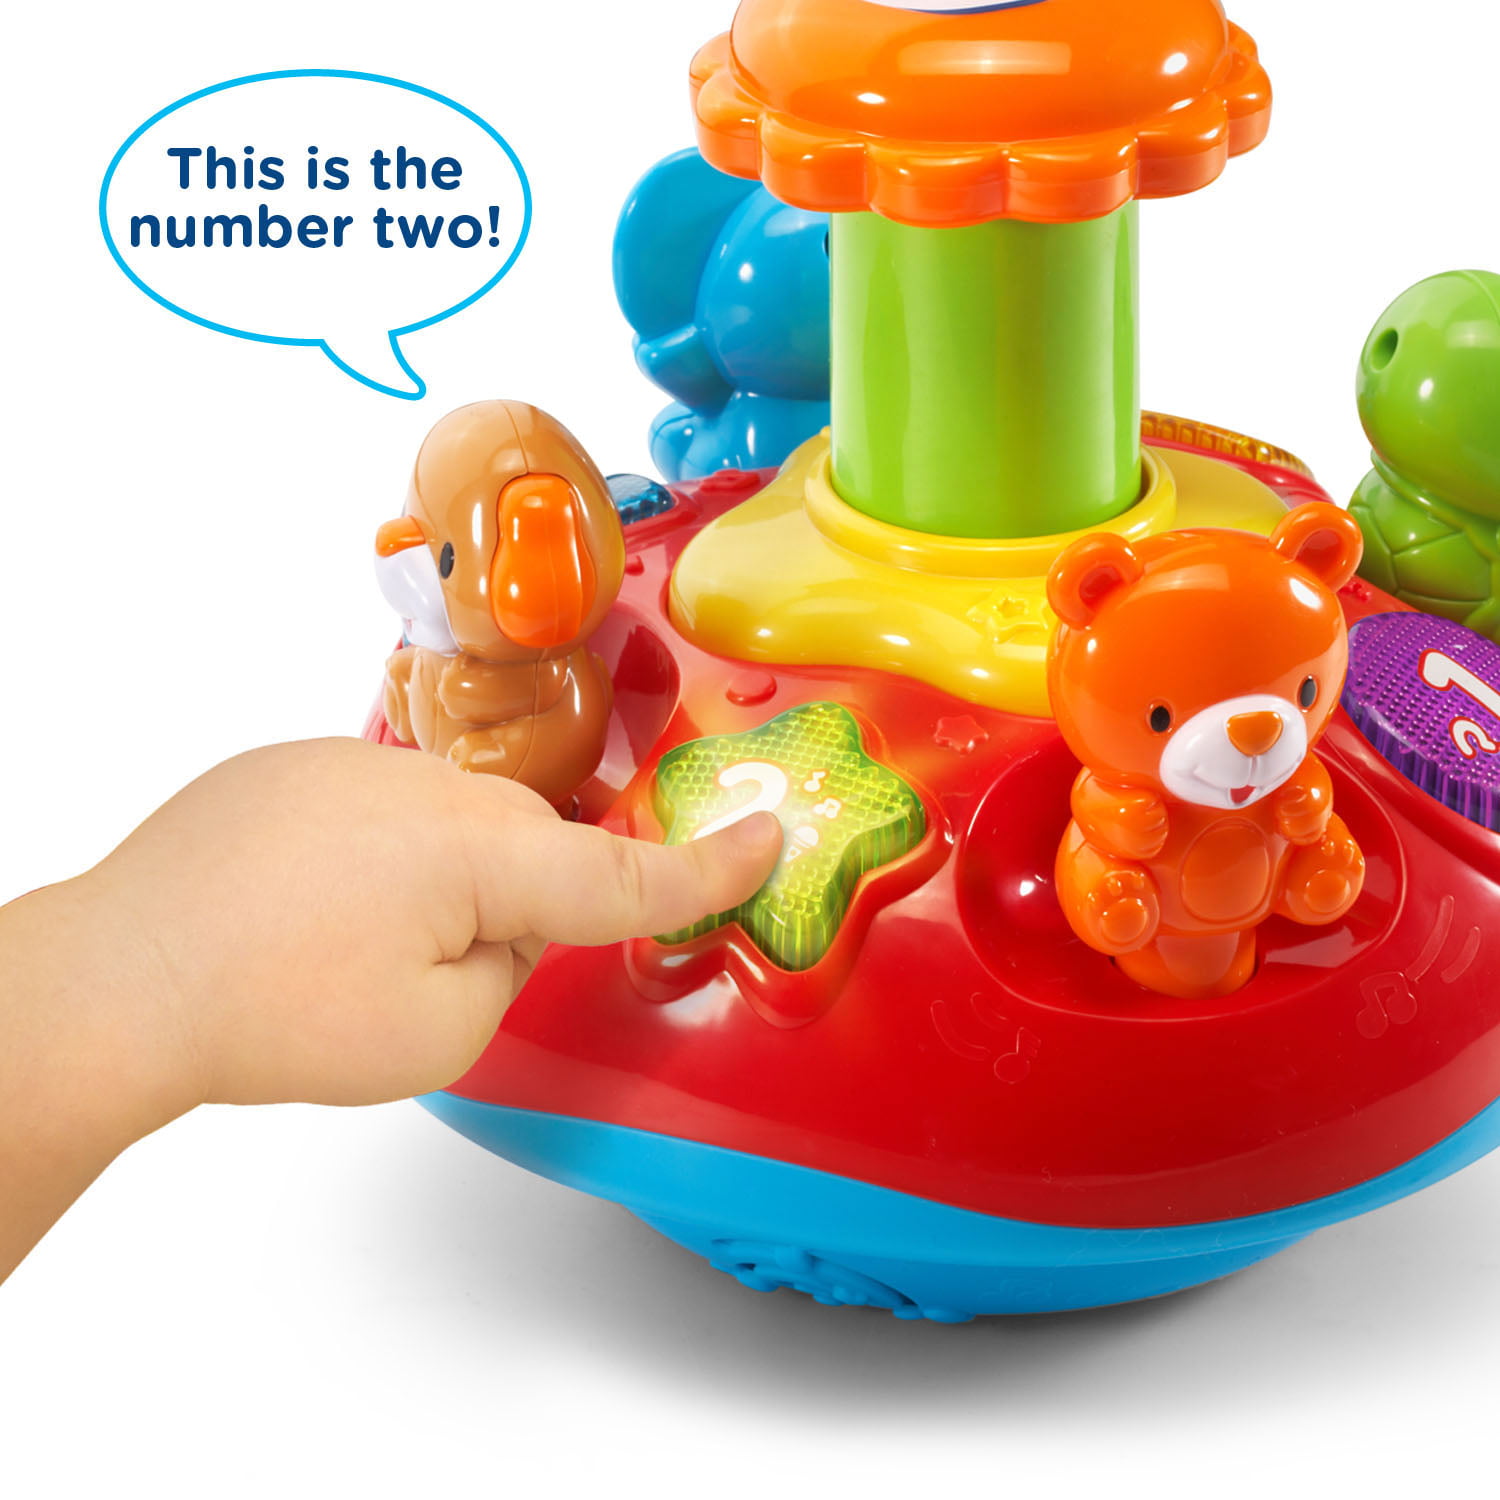 vtech twirl and learn animal top